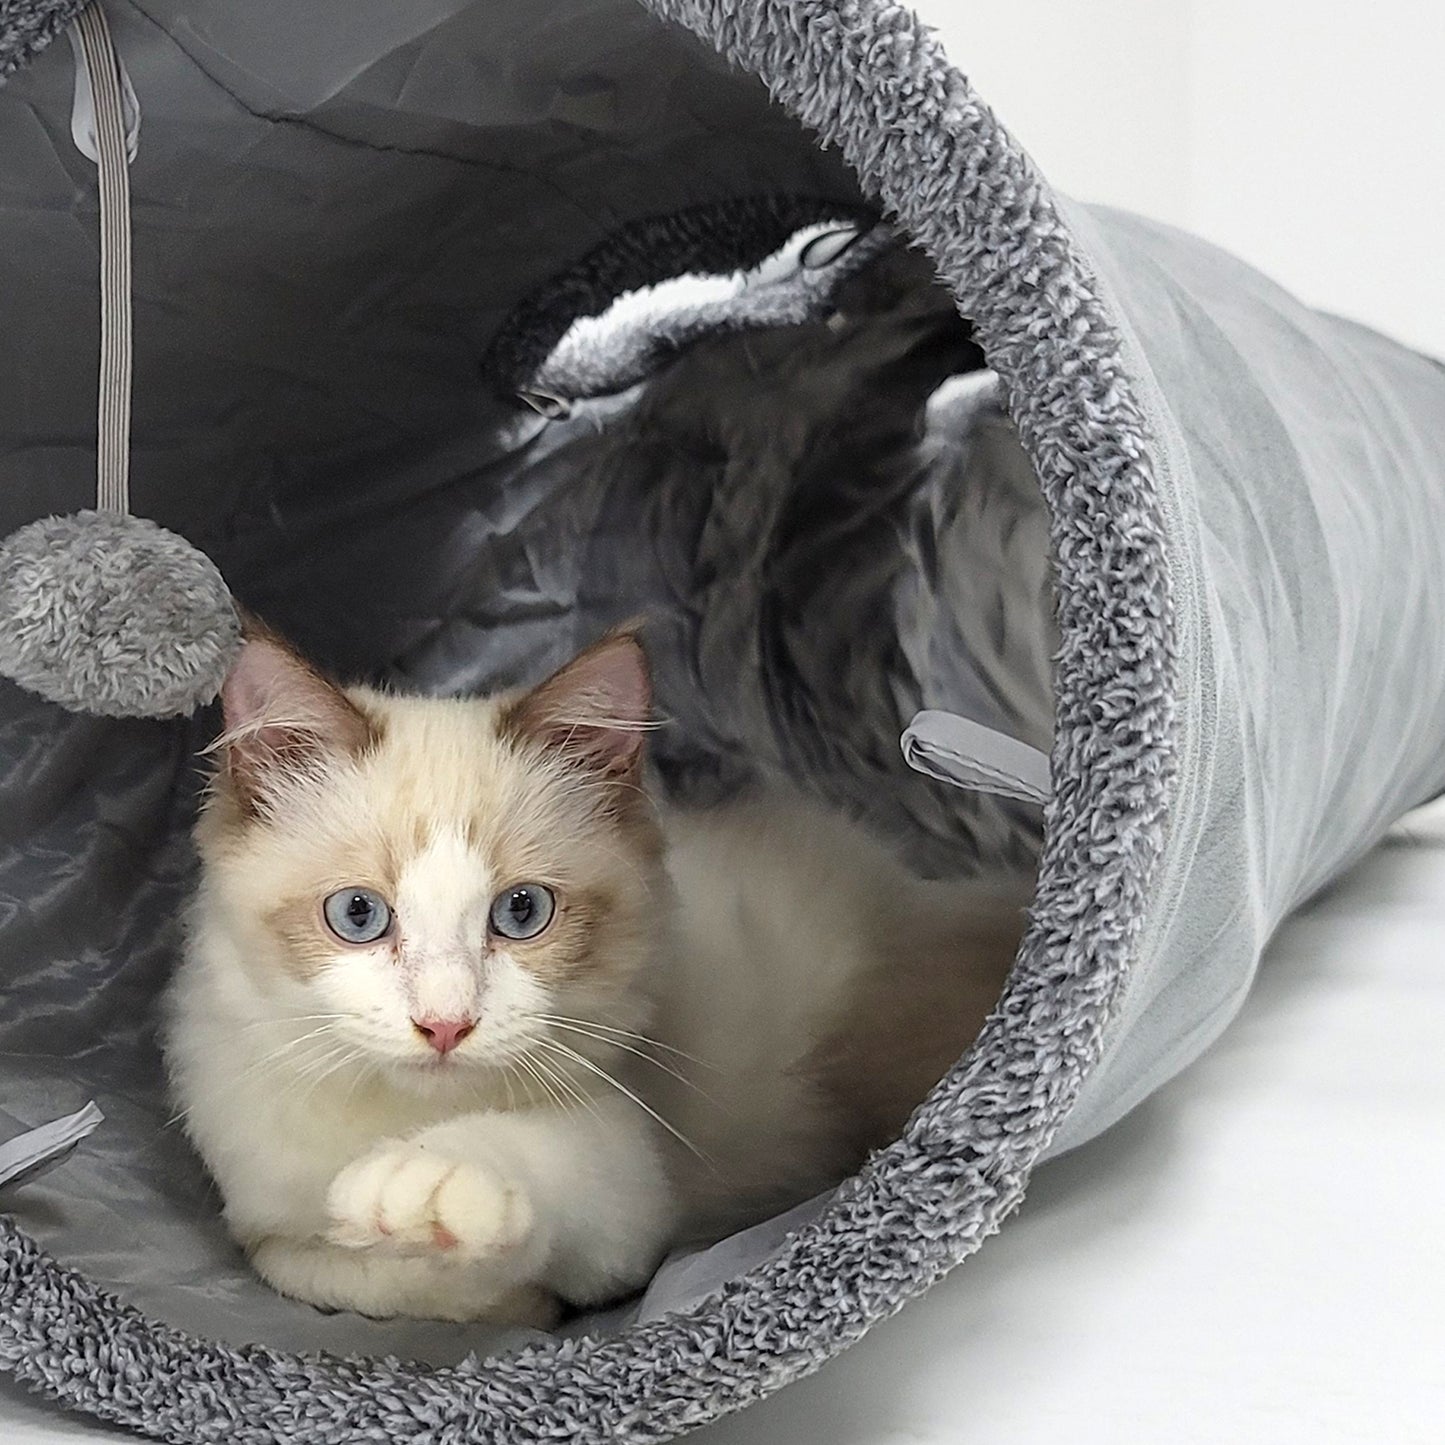 12" dia. Collapsible Crinkle Cat Play Tunnel with Hanging Toy Ball